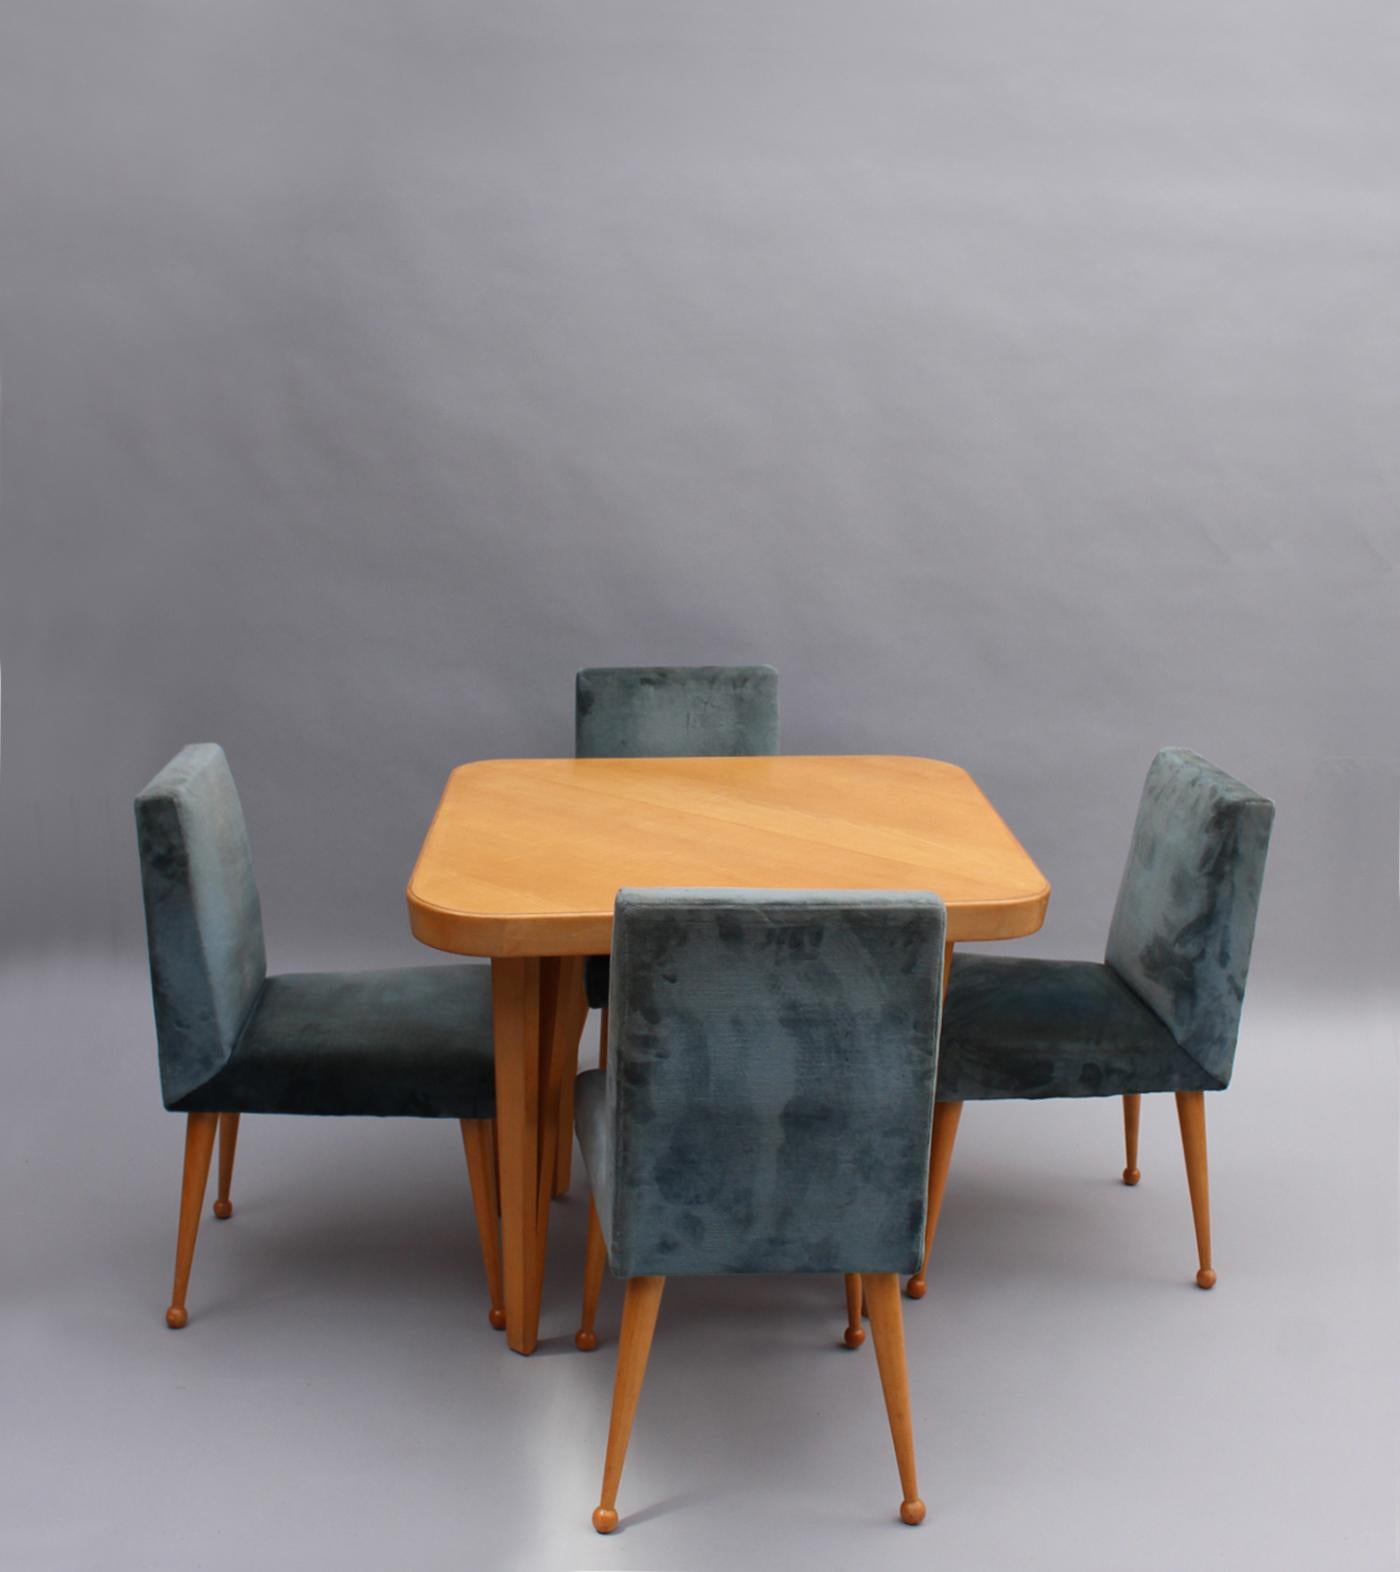 Comprises a diamond shaped extendable sycamore table with tapered legs and four chairs with sycamore tapered legs ending in a ball shape.

Dimensions of the table are:
H: 79cm – 31 1/8”
L: 129cm – 51” (229cm – 90” with center extension leaves)
D: